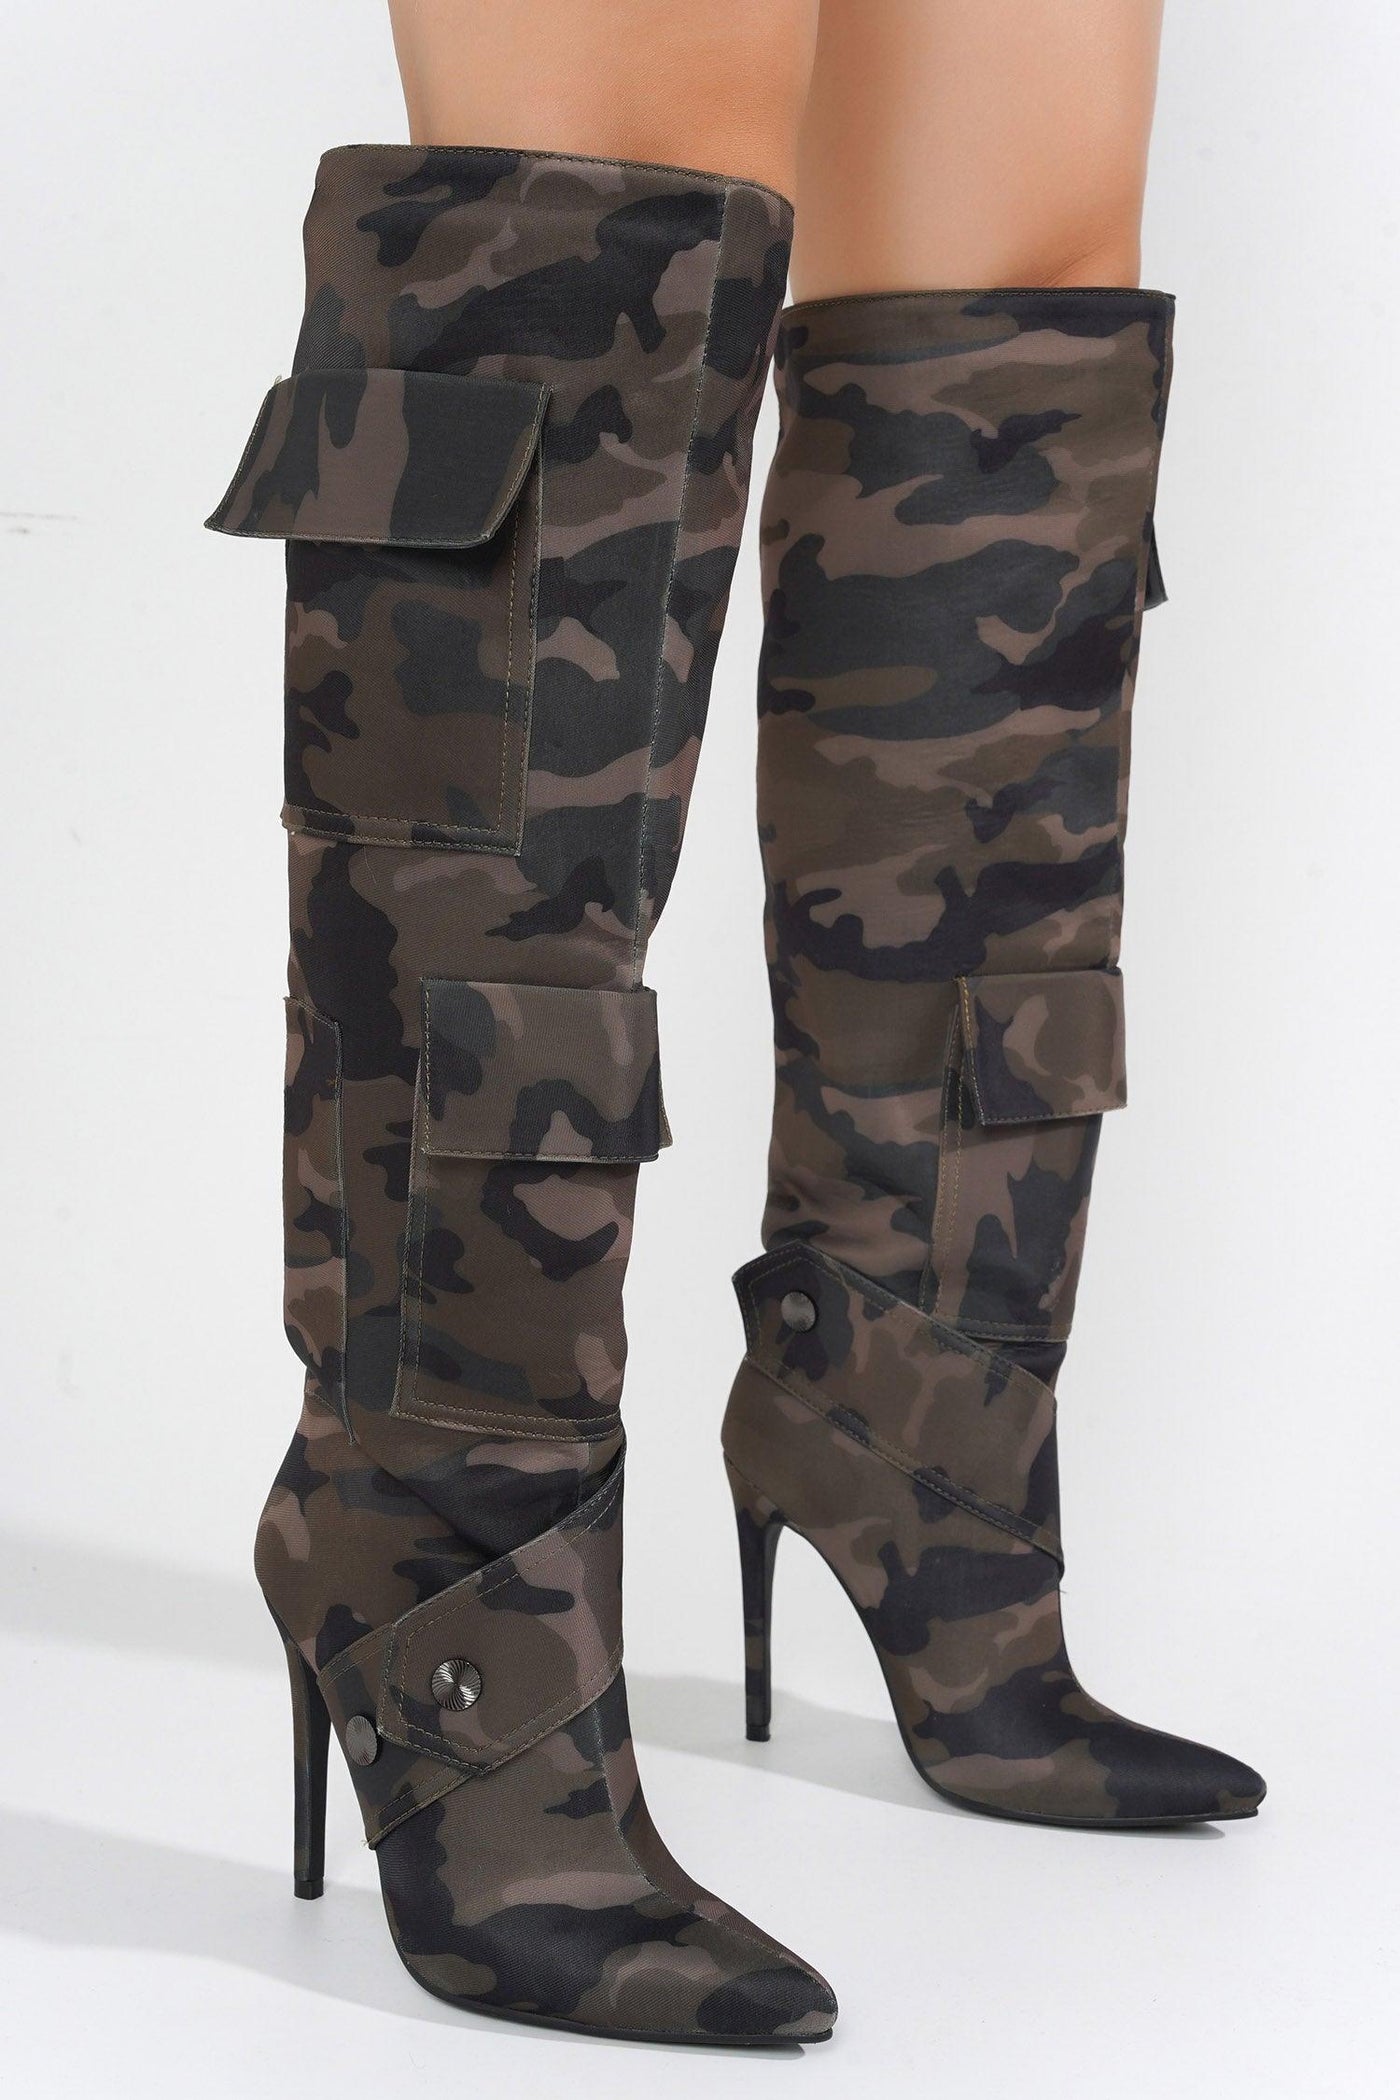 VIRDEN - CAMOUFLAGE Thigh High Boots - AMIClubwear